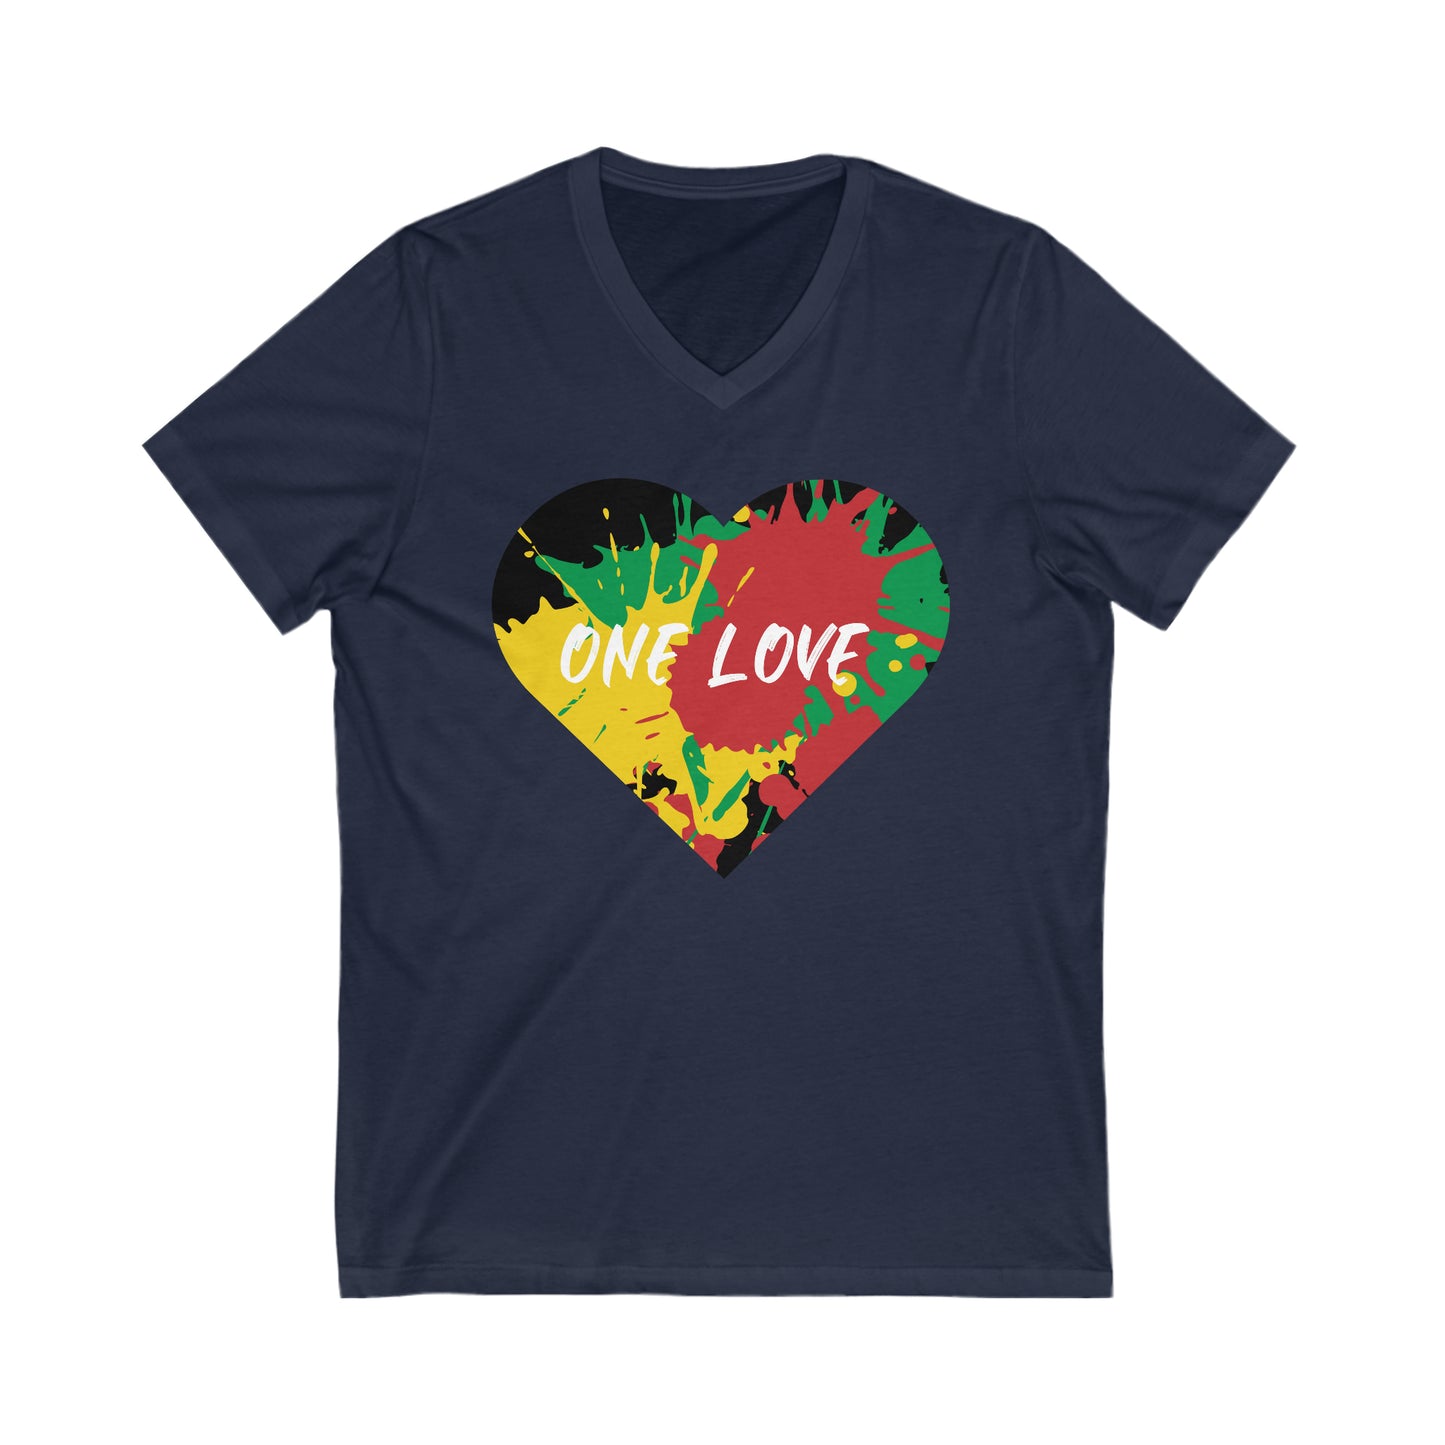 RED GREEN AND GOLD GRAPHIC V NECK UNISEX T SHIRT